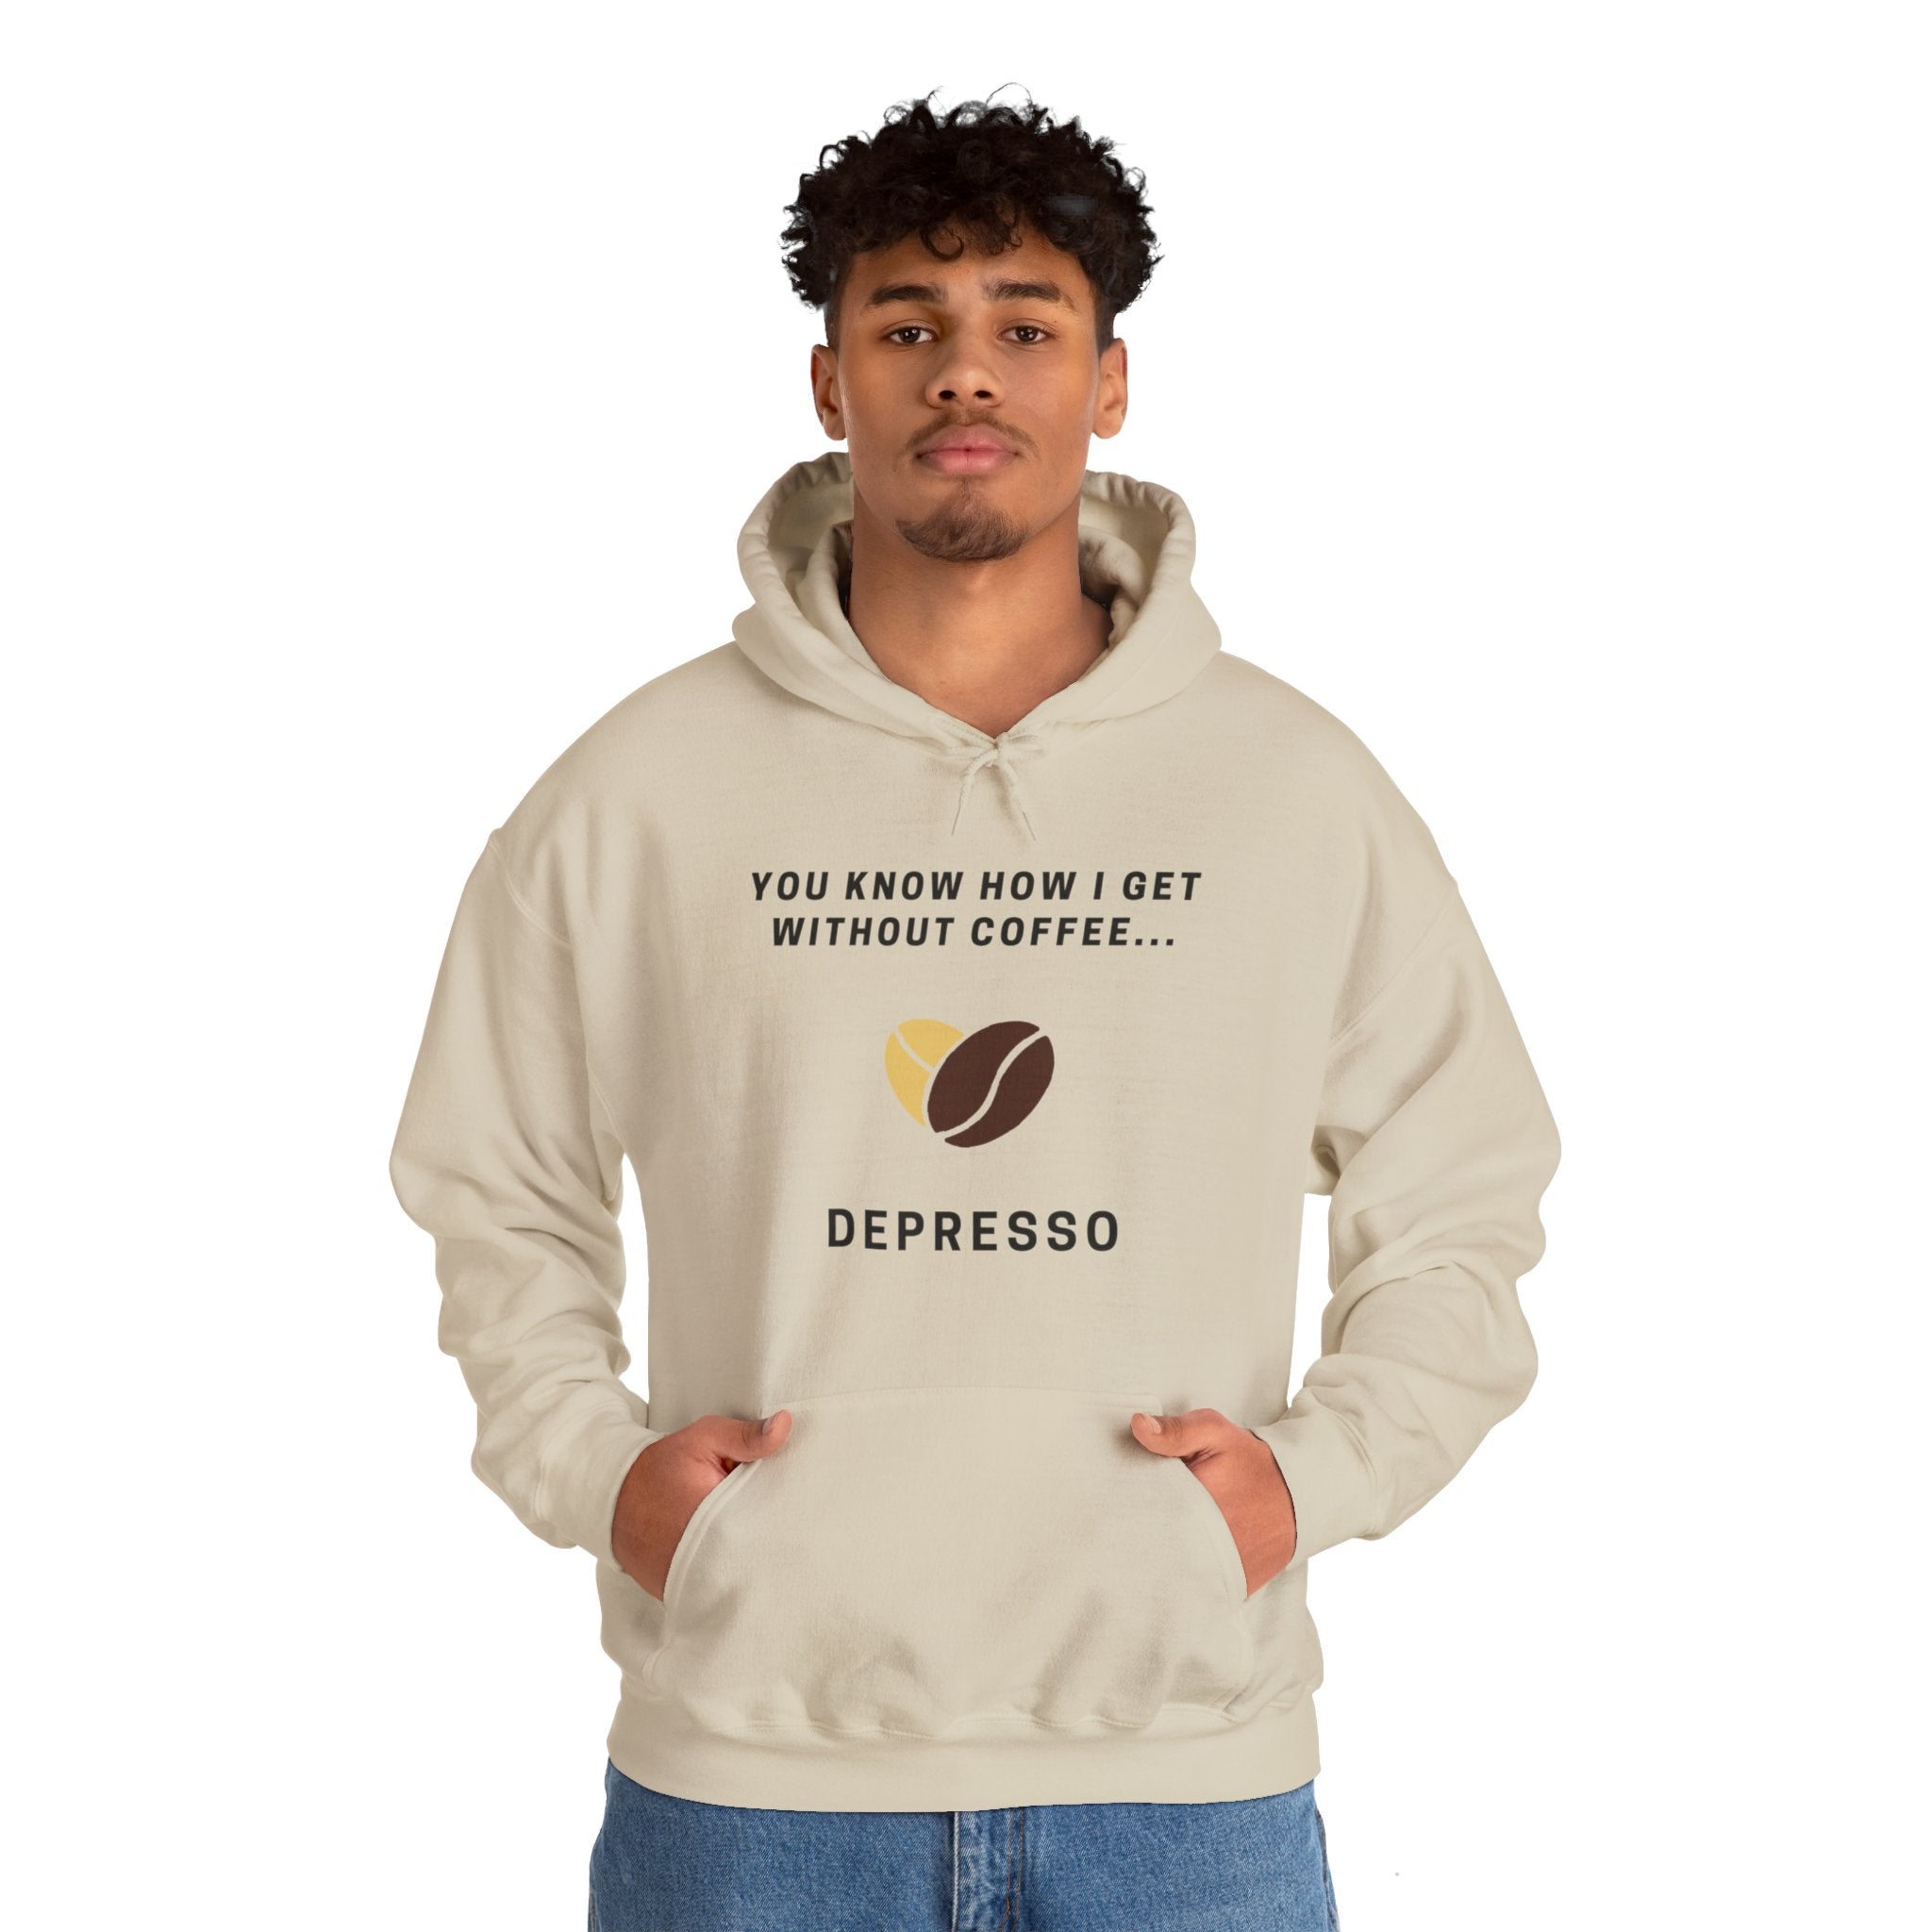 Depresso Hoodie [FOR People Who Get Depresso Without Espresso]